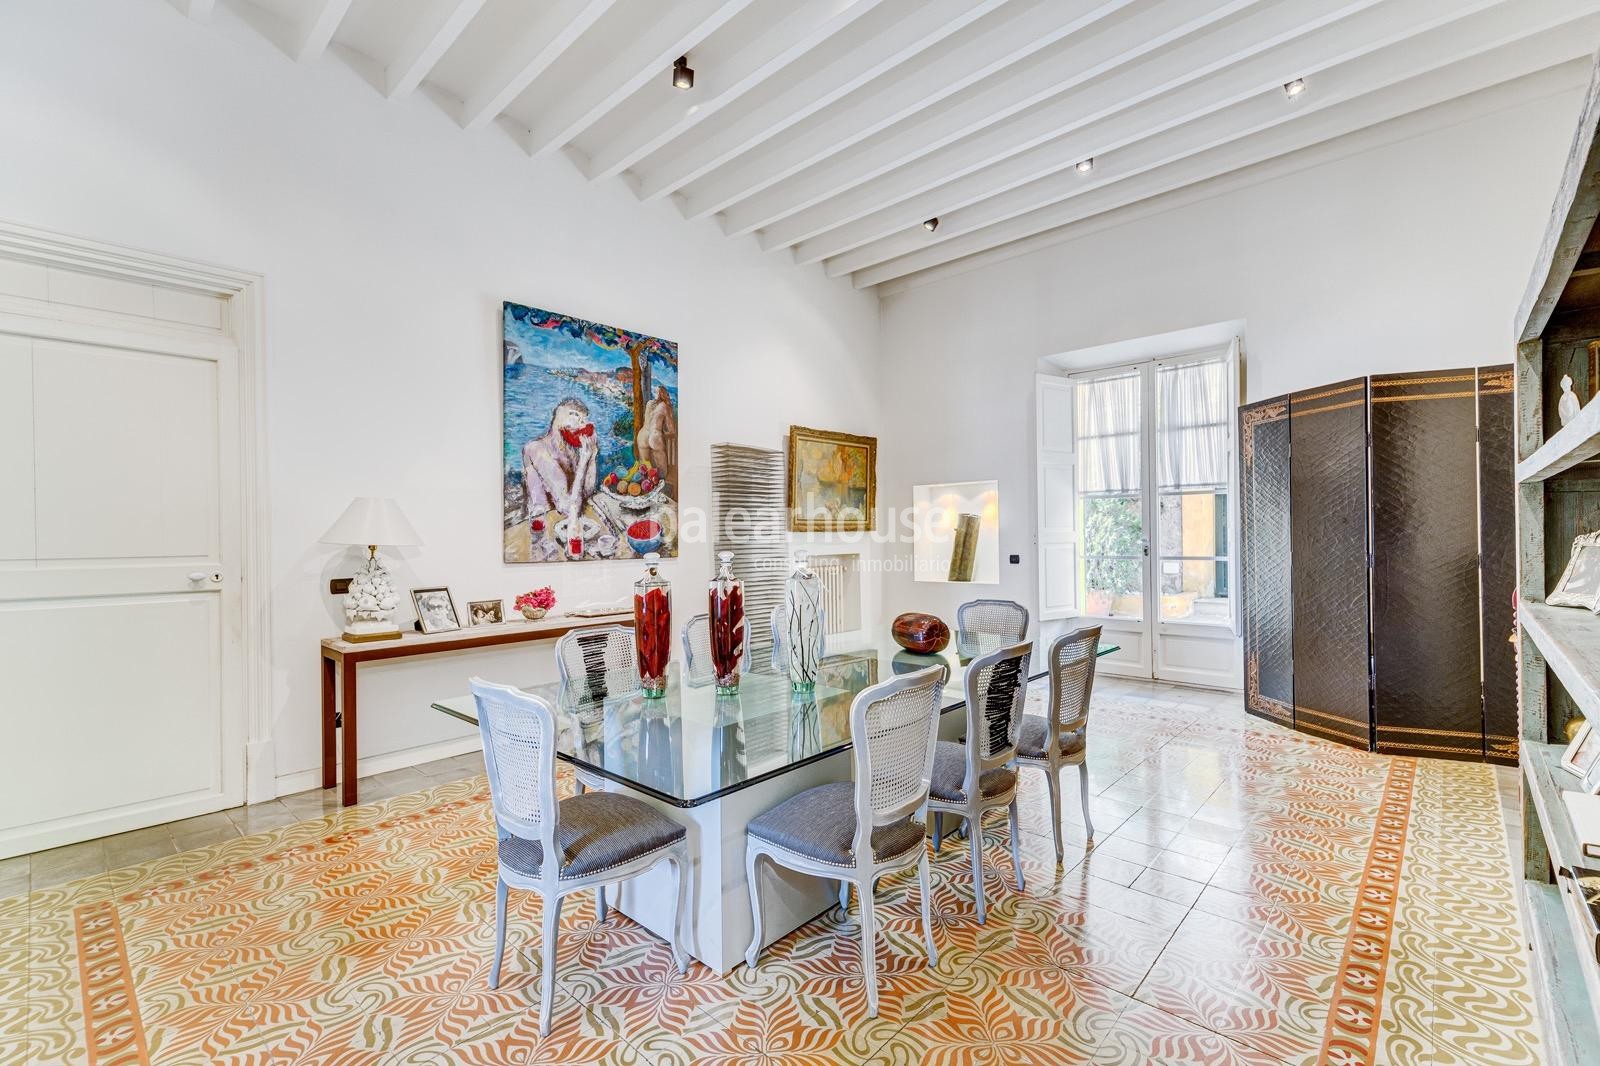 Large stately villa on Palma's Paseo Marítimo with swimming pool, garden and modern interiors